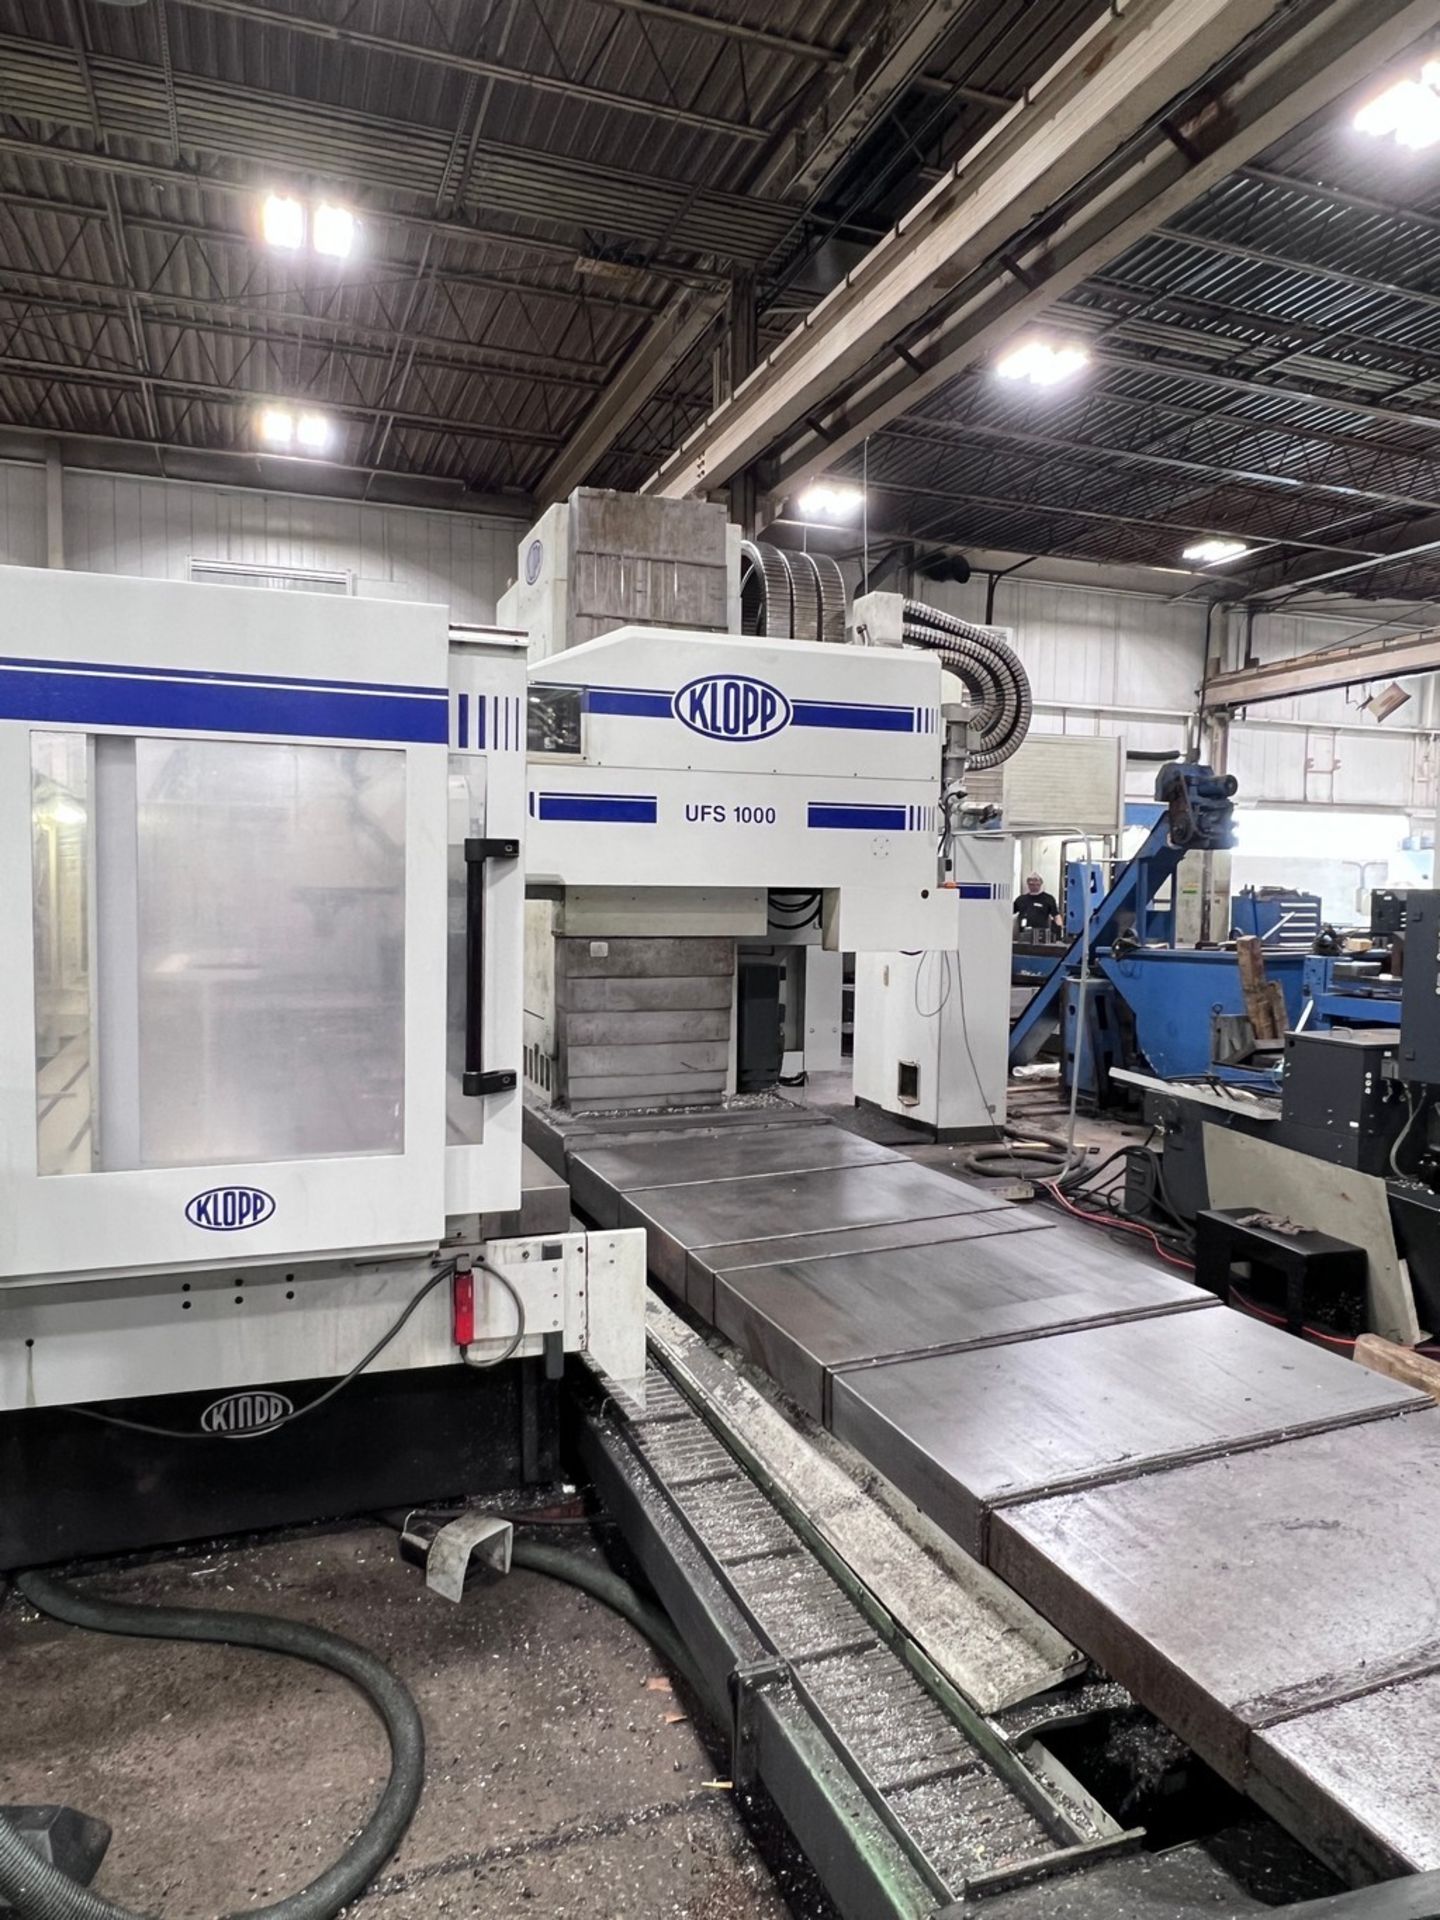 2007 Klopp UFS1000 CNC 5-Axis Travelling Column Milling Machine - Image 9 of 10